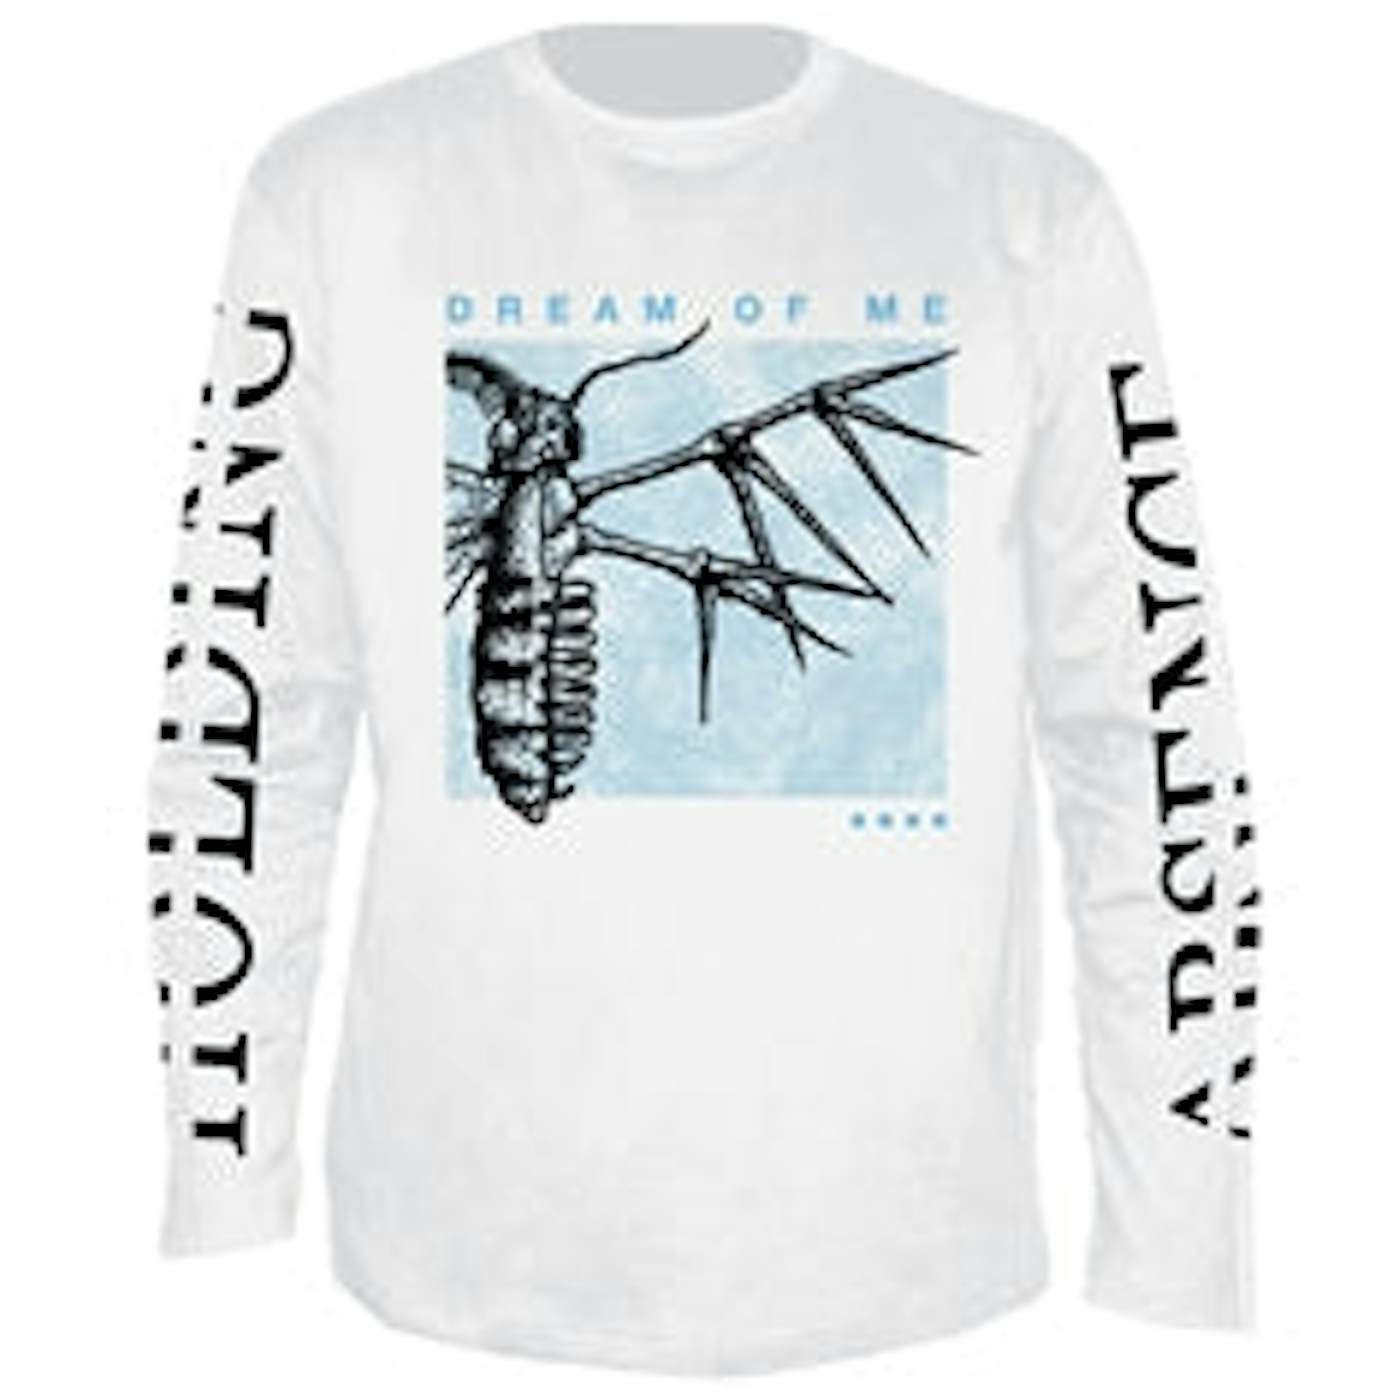 Holding Absence Long Sleeve T Shirt - Dream Of Me